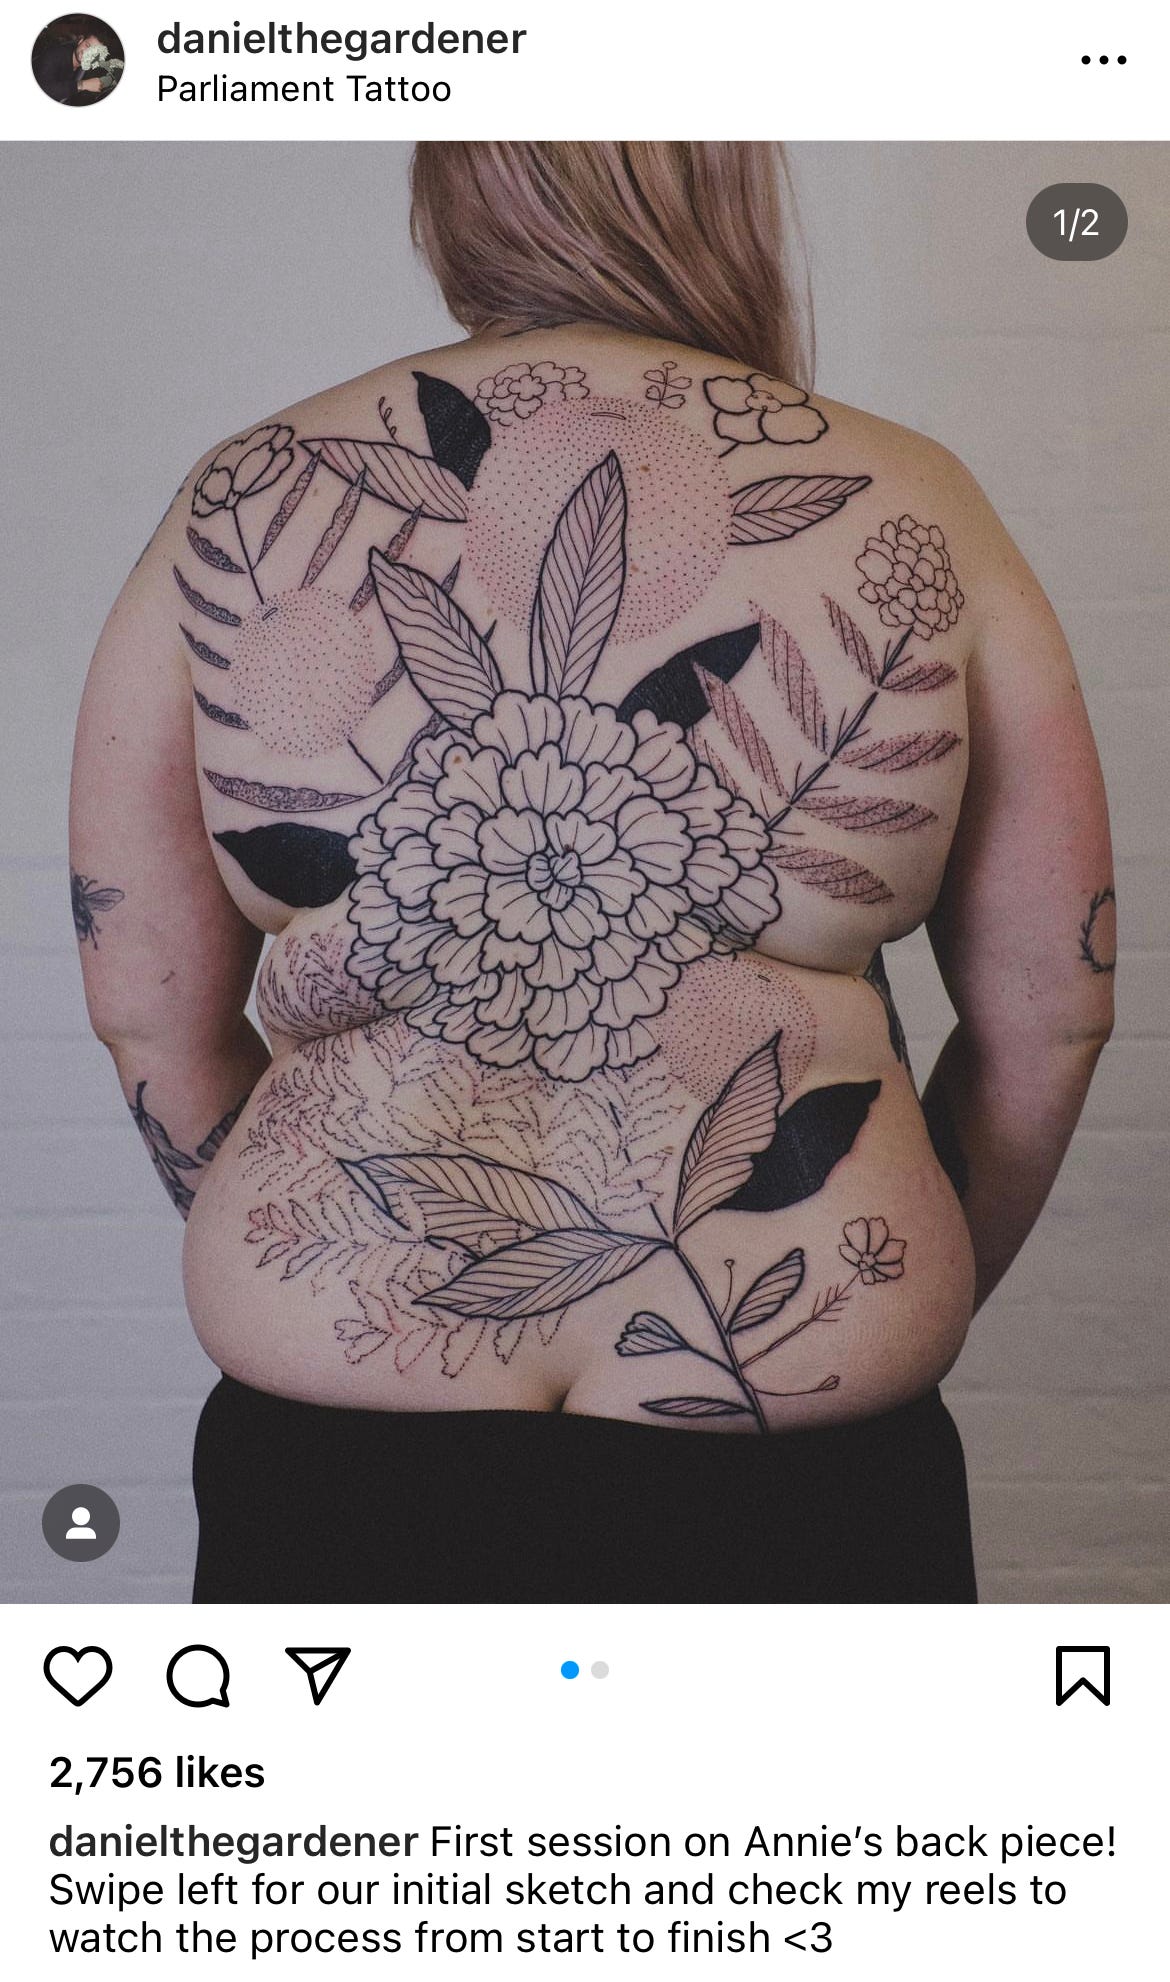 image description: the work of tattoo artist Daniel the Gardener, featuring a plus-sized white woman with a full back piece of botanical elements in black and grey.